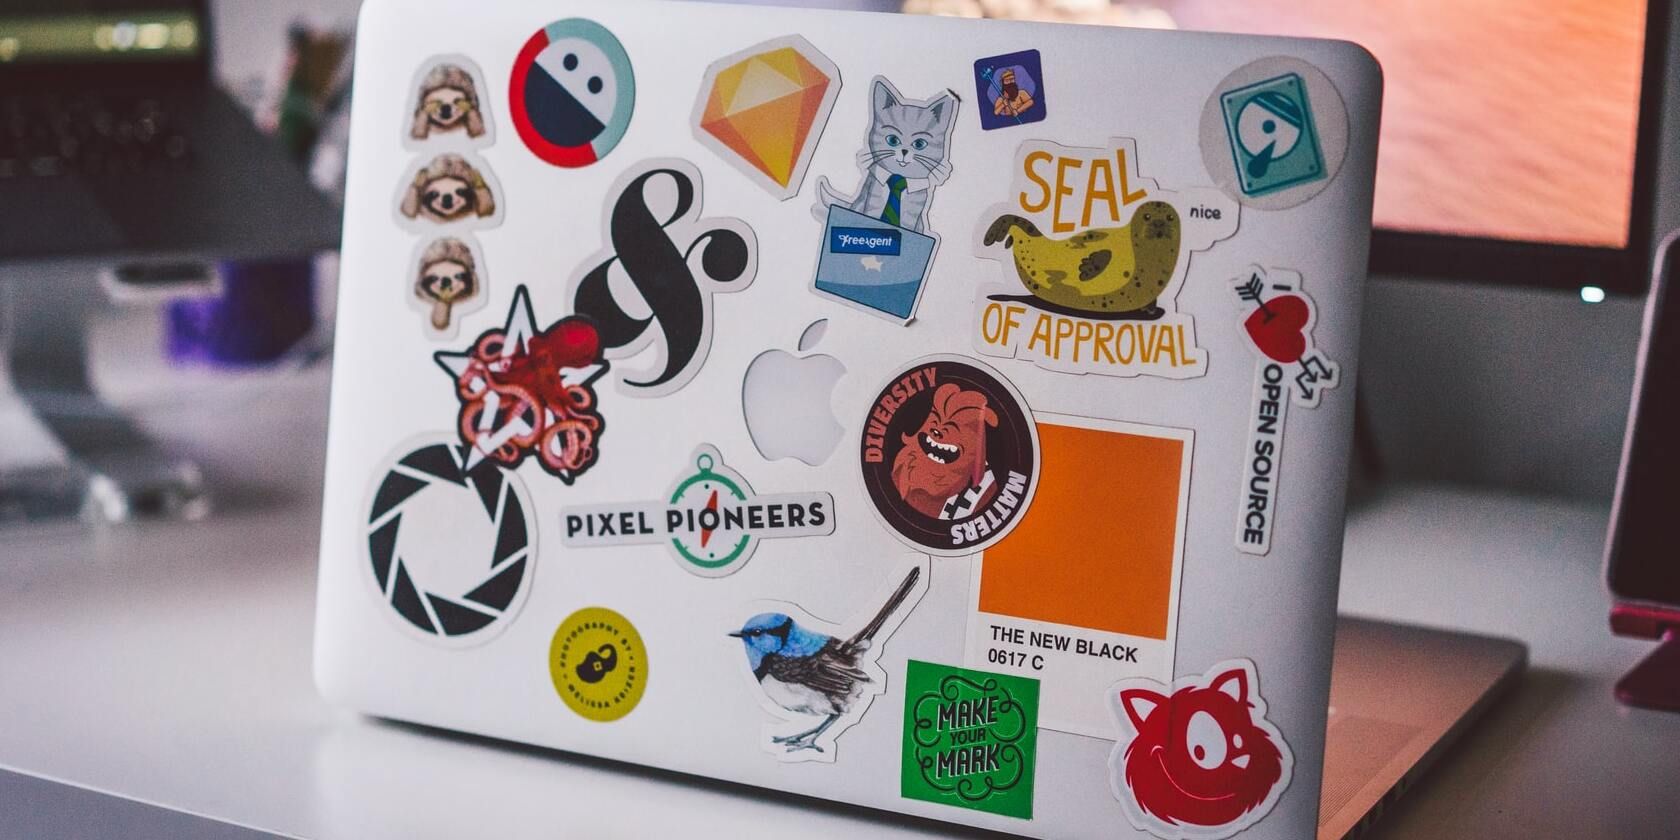 Image showing stickers on the back of a laptop